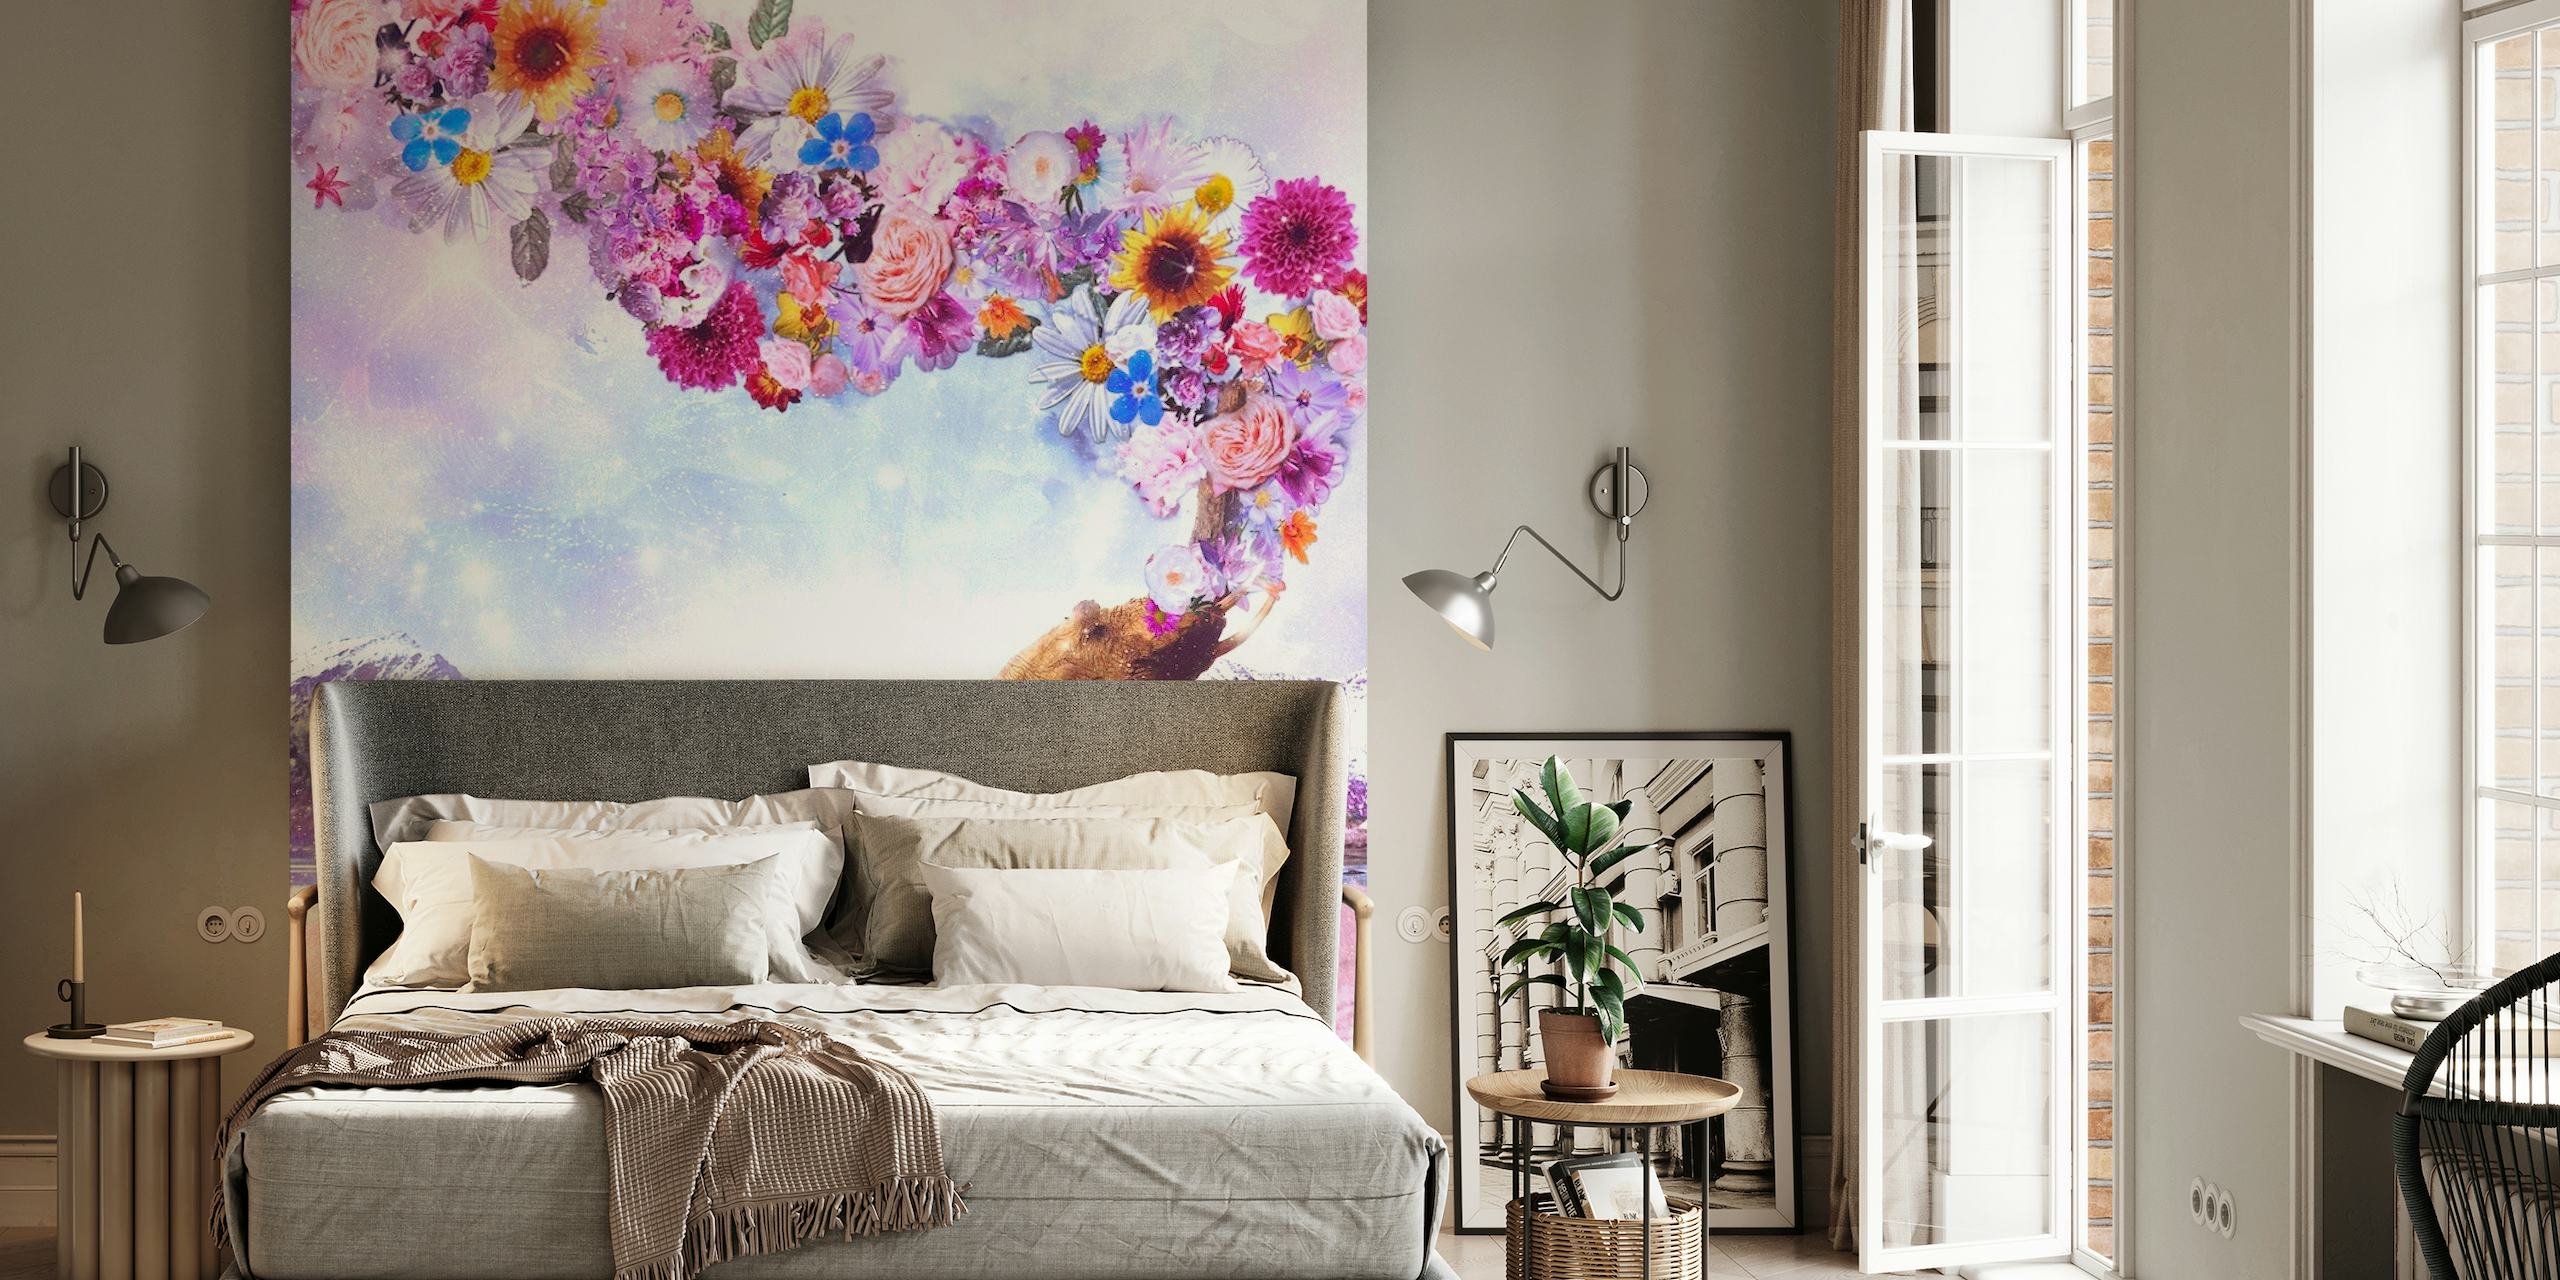 Elephant with floral crown wall mural in a snowy mountain setting